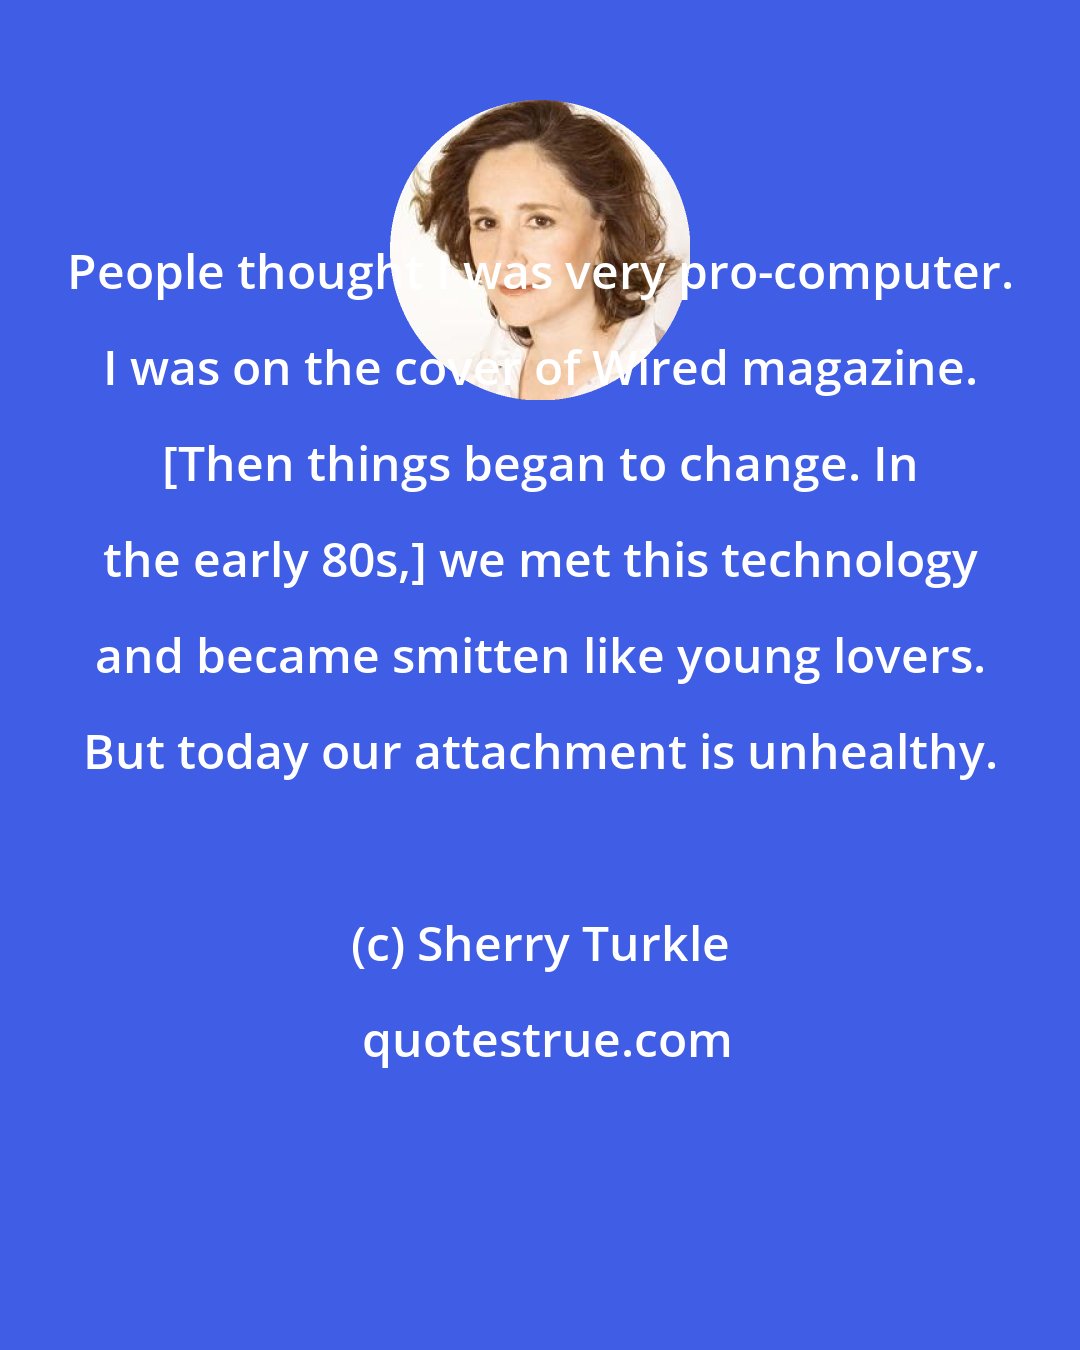 Sherry Turkle: People thought I was very pro-computer. I was on the cover of Wired magazine. [Then things began to change. In the early 80s,] we met this technology and became smitten like young lovers. But today our attachment is unhealthy.